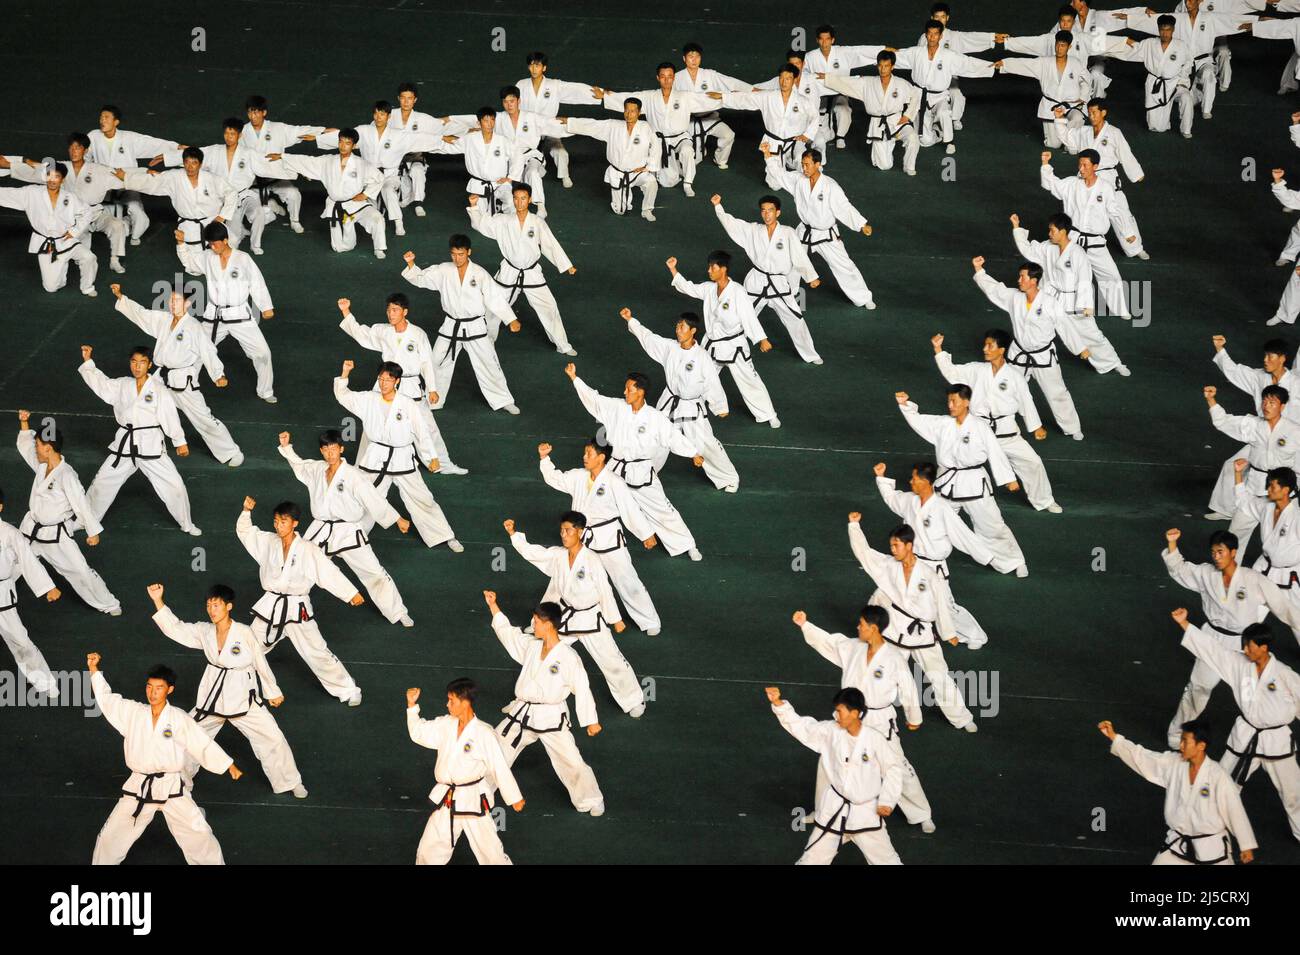 08.08.2012, Pjoengjang, North Korea, Asia - mass choreography and performance of taekwondo fighters at the First of May Stadium during the Arirang Festival and Mass Games in the North Korean capital. [automated translation] Stock Photo